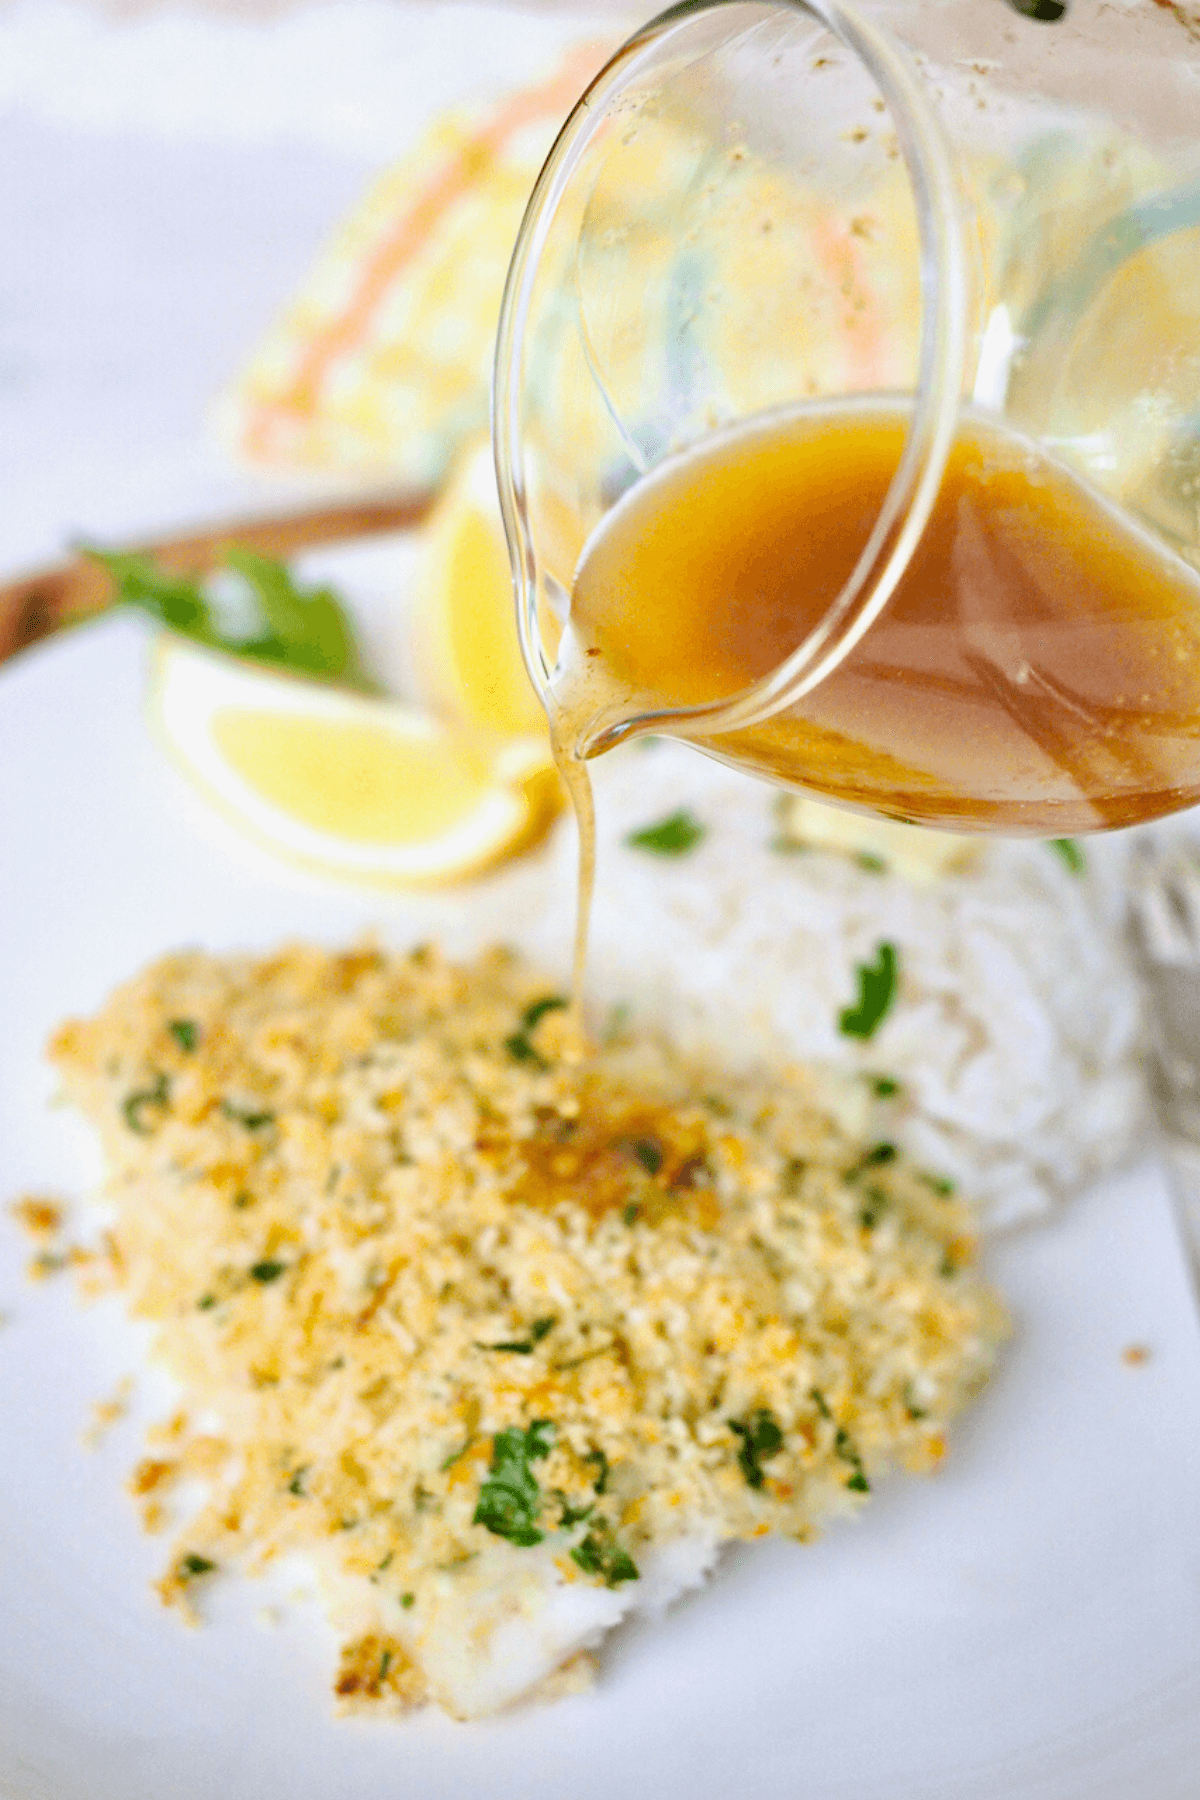 Pouring browned butter lemon garlic sauce over the top of the baked cod.